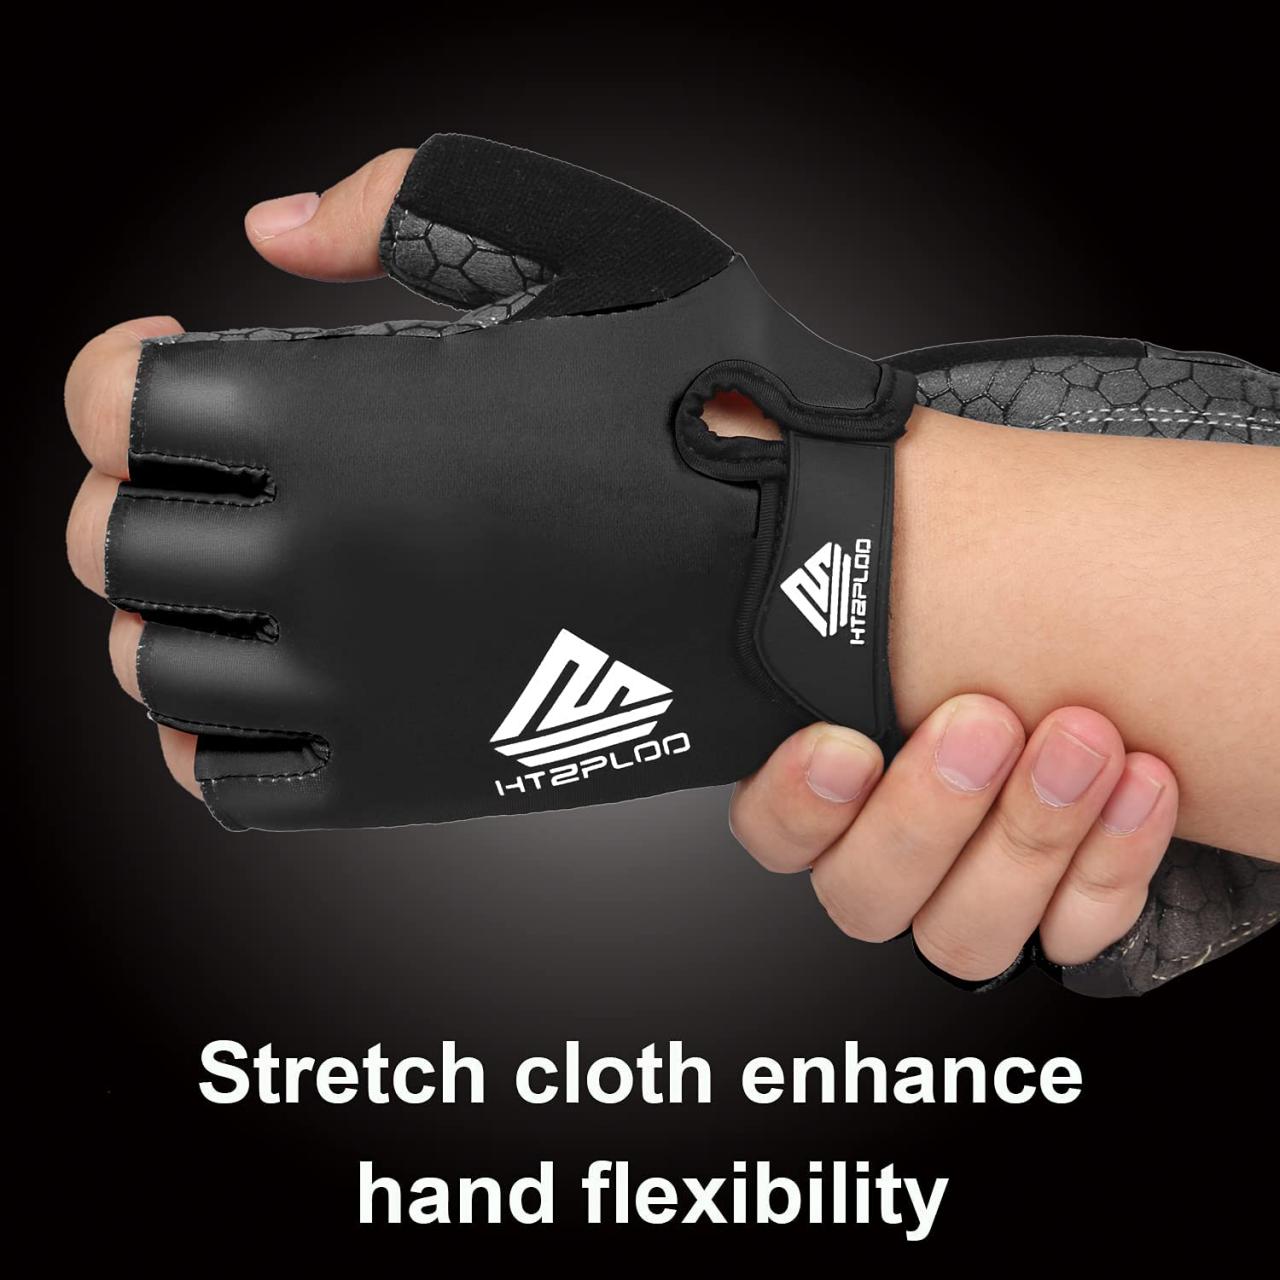 Buy HTZPLOO Bike Gloves Cycling Gloves Biking Gloves for Men Women with  Anti-Slip Shock-Absorbing Pad,Light Weight,Nice Fit,Half Finger Bicycle  Gloves Online in Taiwan. B08XNRVZ9H